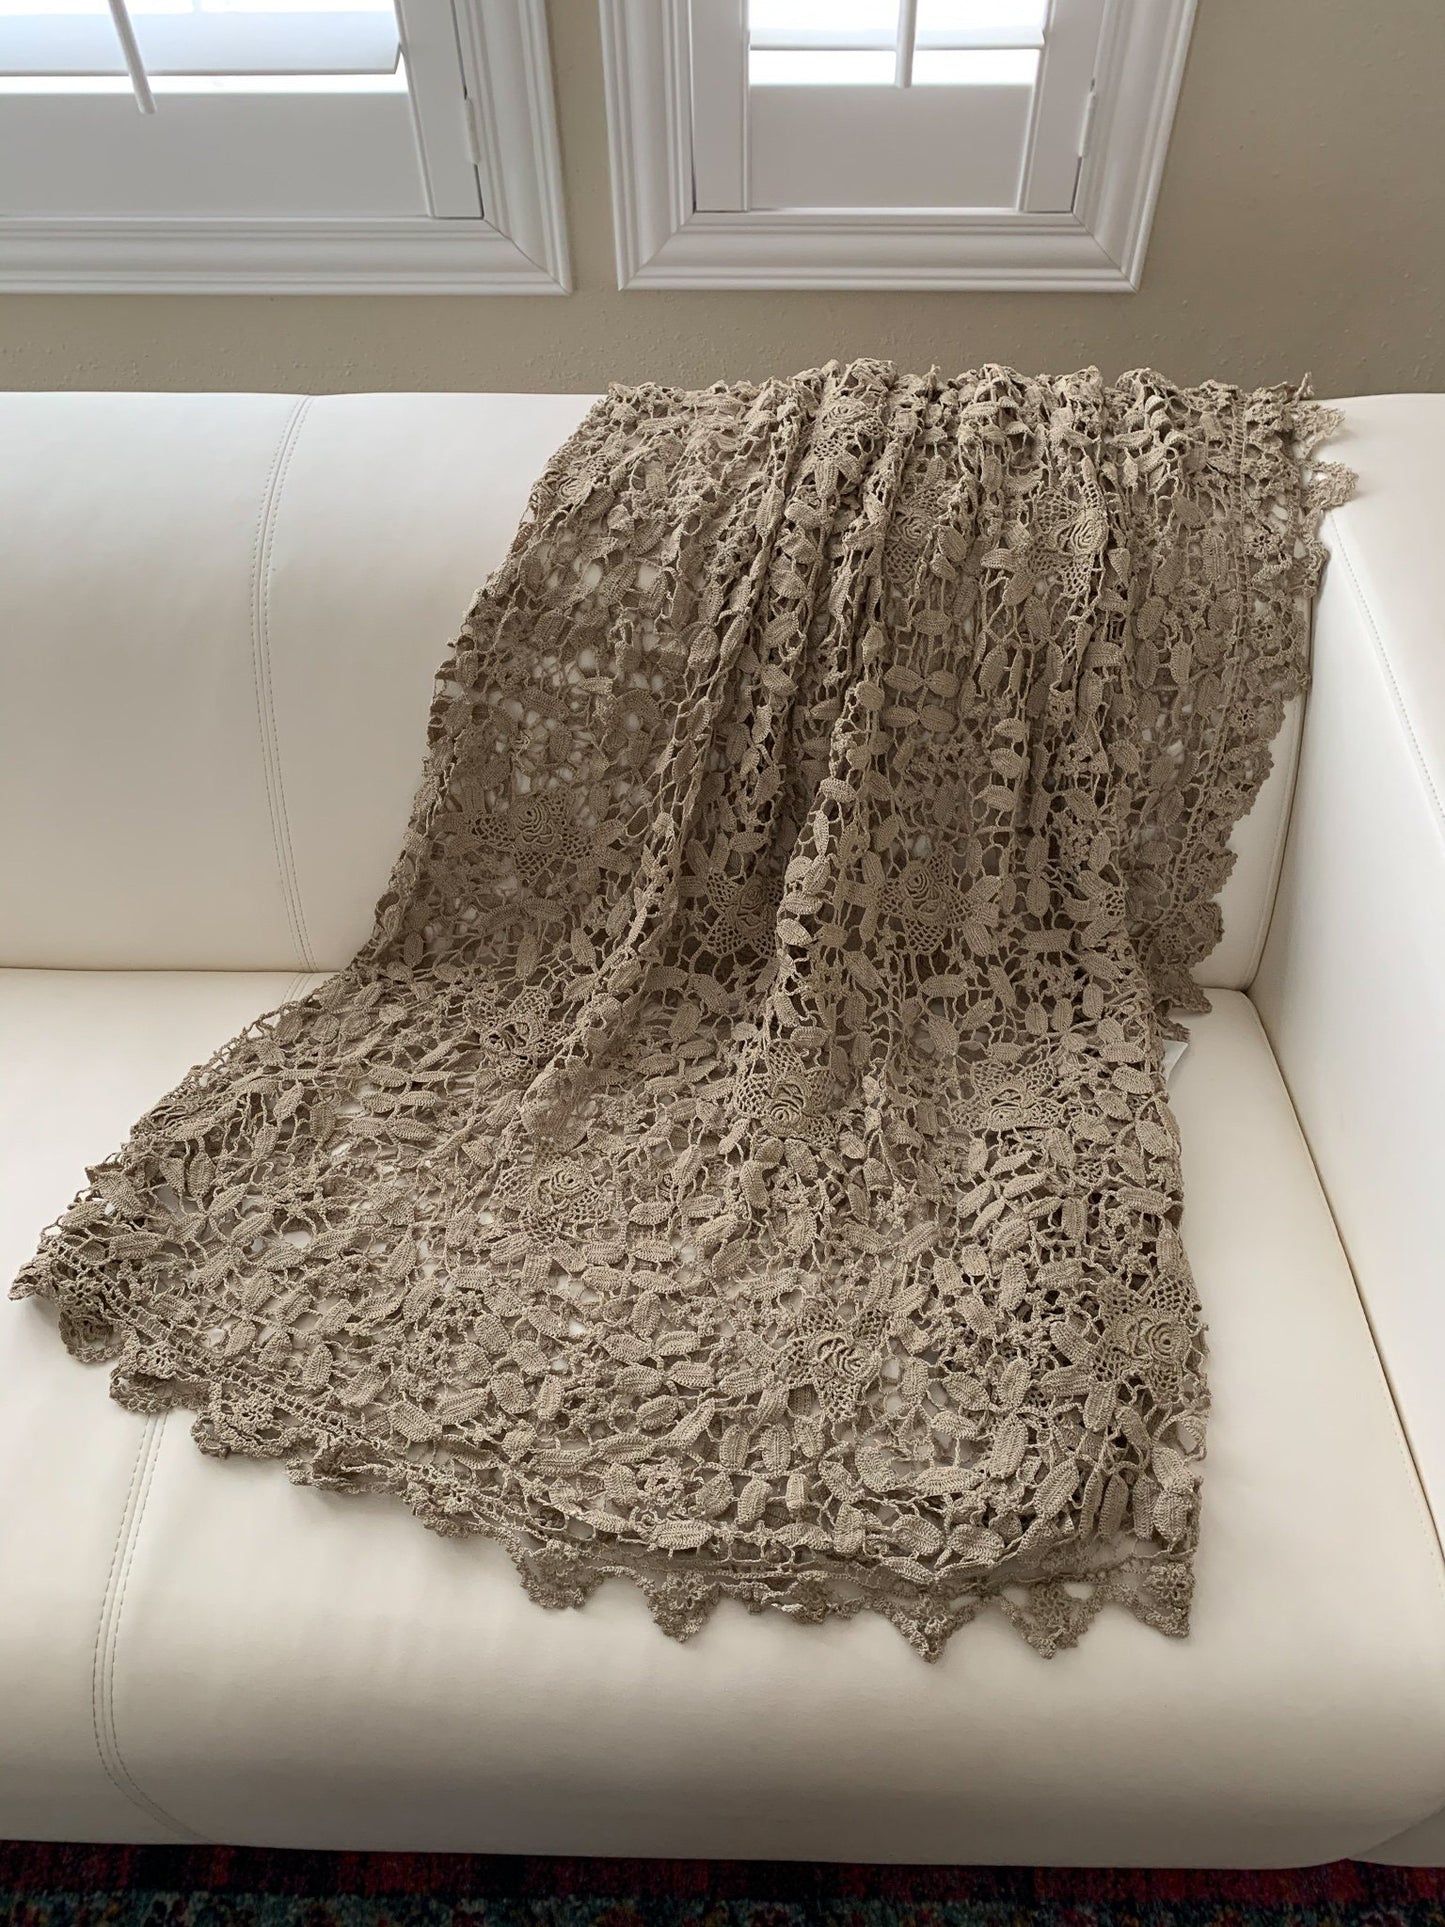 Lim's Vintage All Hand Crochet Throw Blanket 84" x 46" Rectangular Shape, Color Taupe